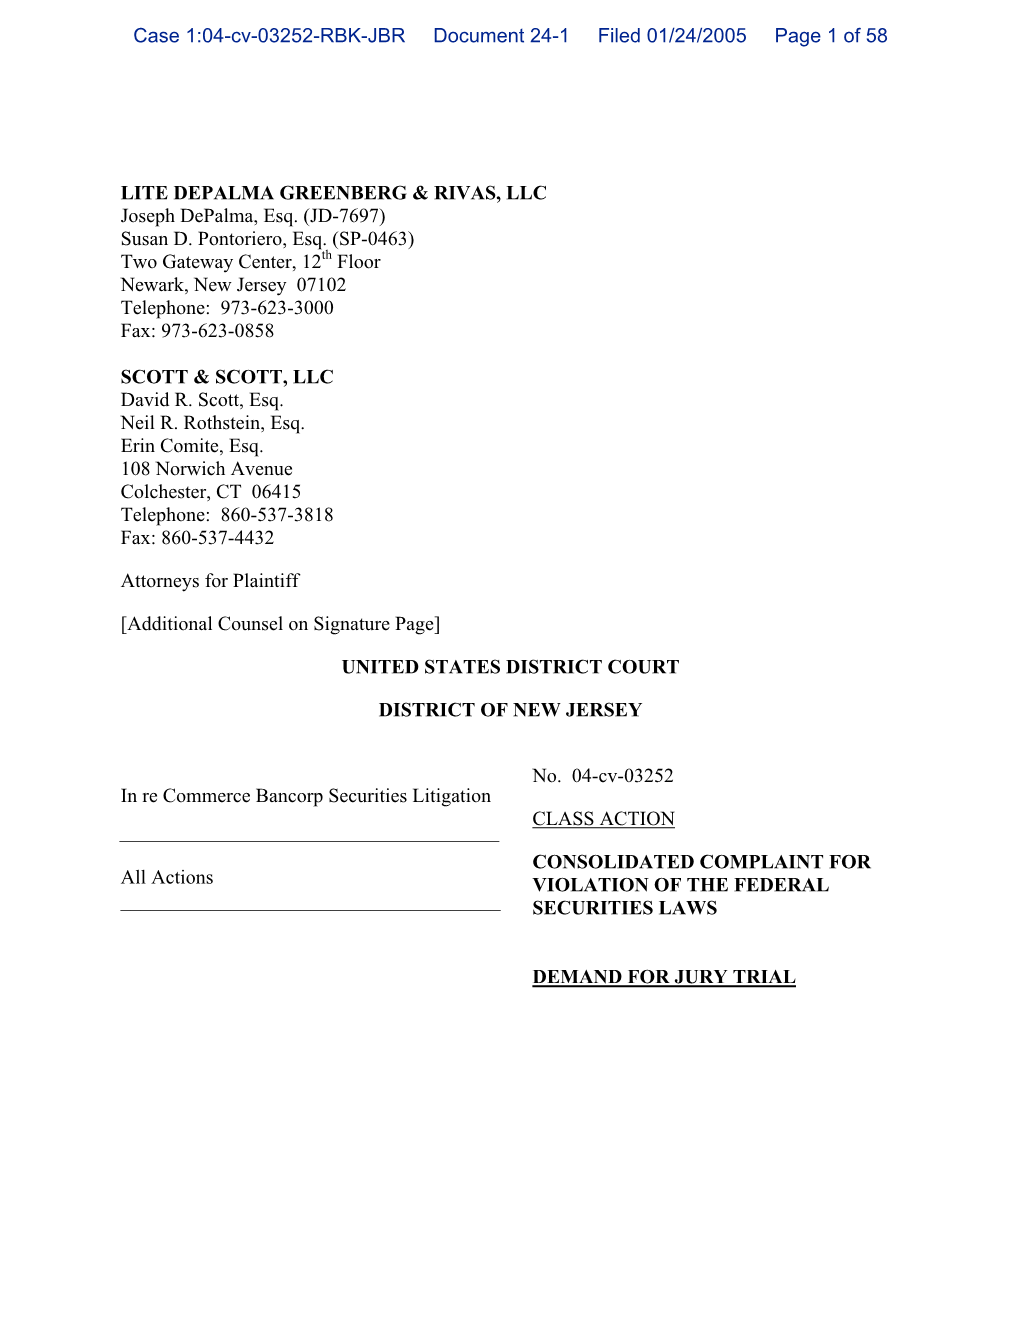 In Re: Commerce Bancorp Securities Litigation 04-CV-03252